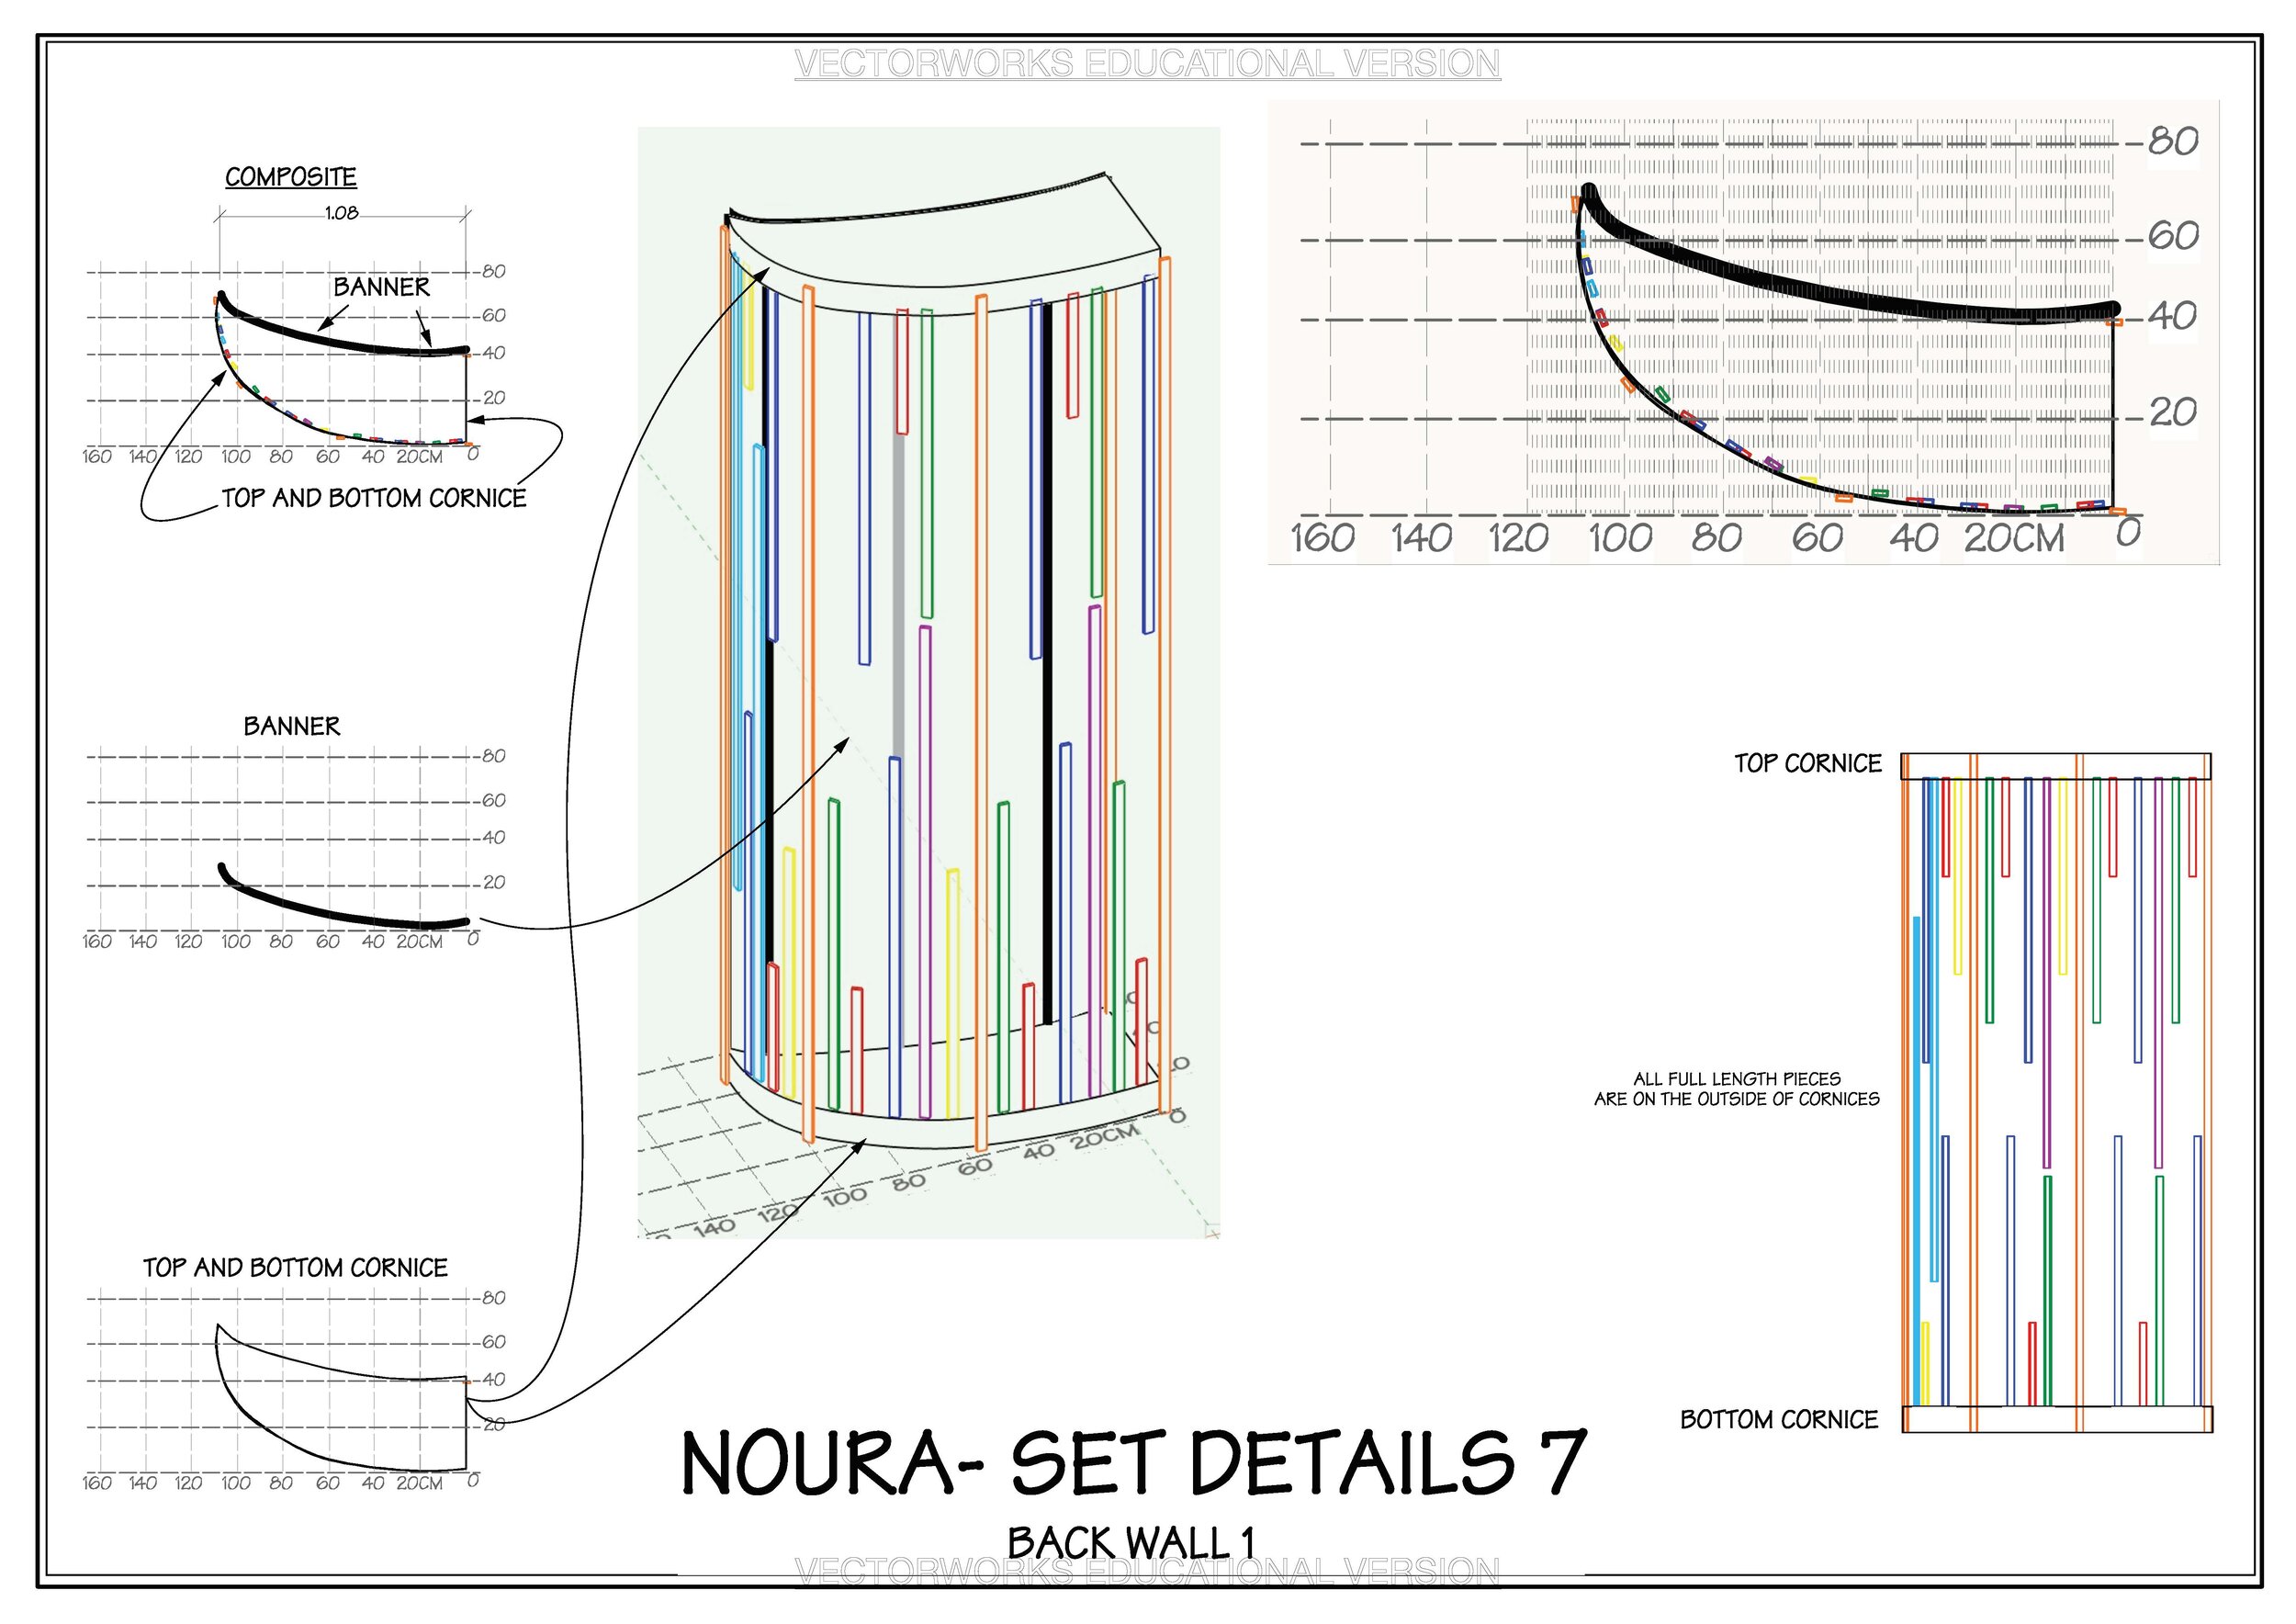 Noura- Back wall section details